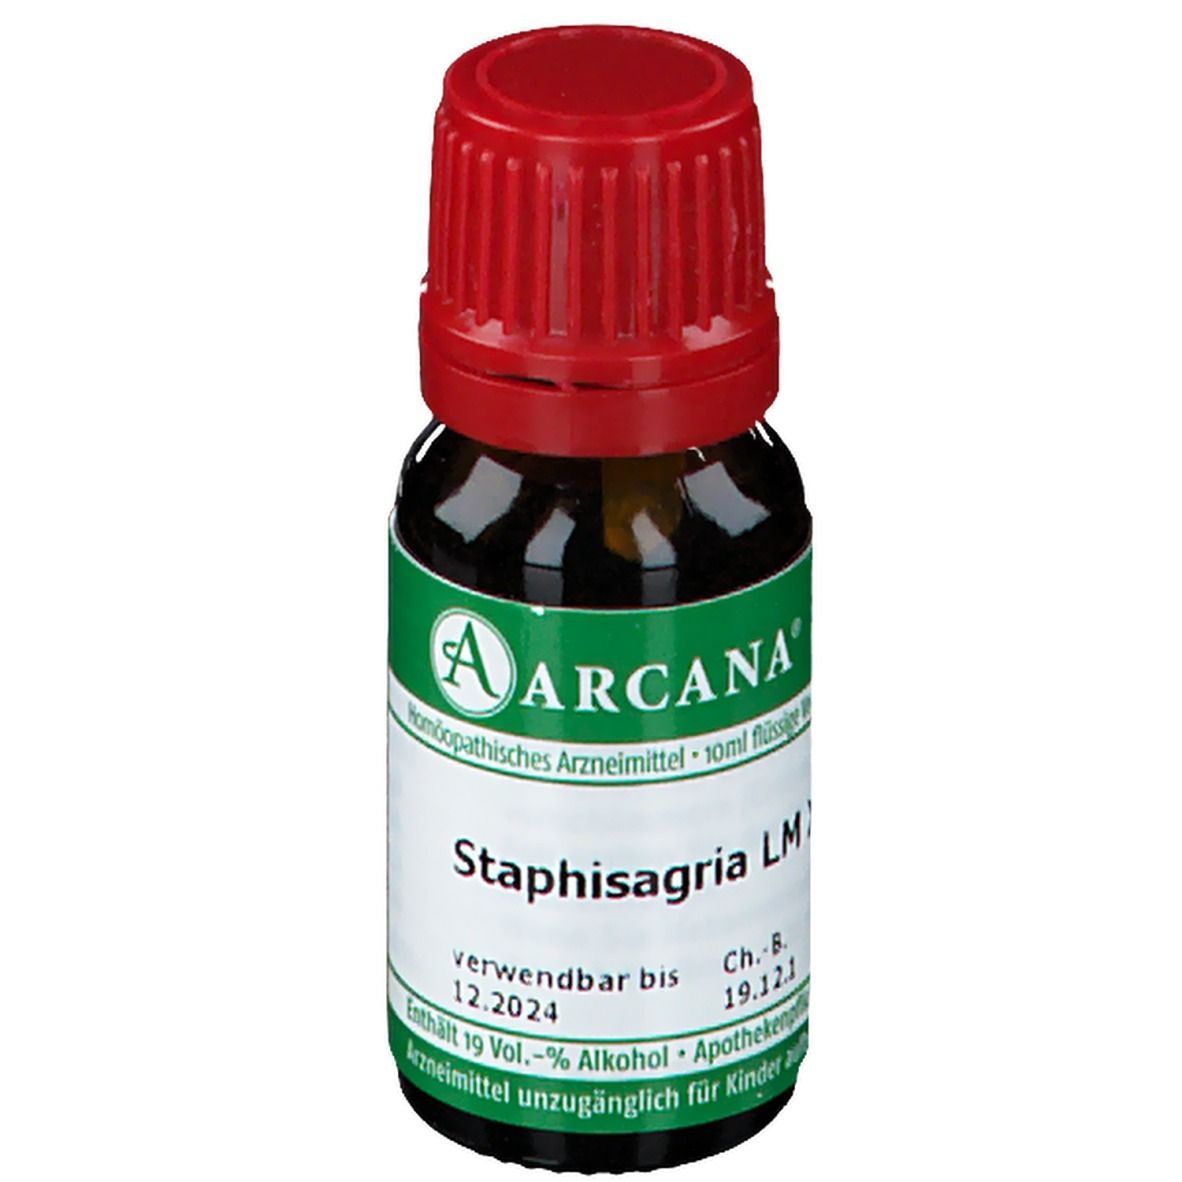 Arcana® Staphisagria Lm XII Dilution